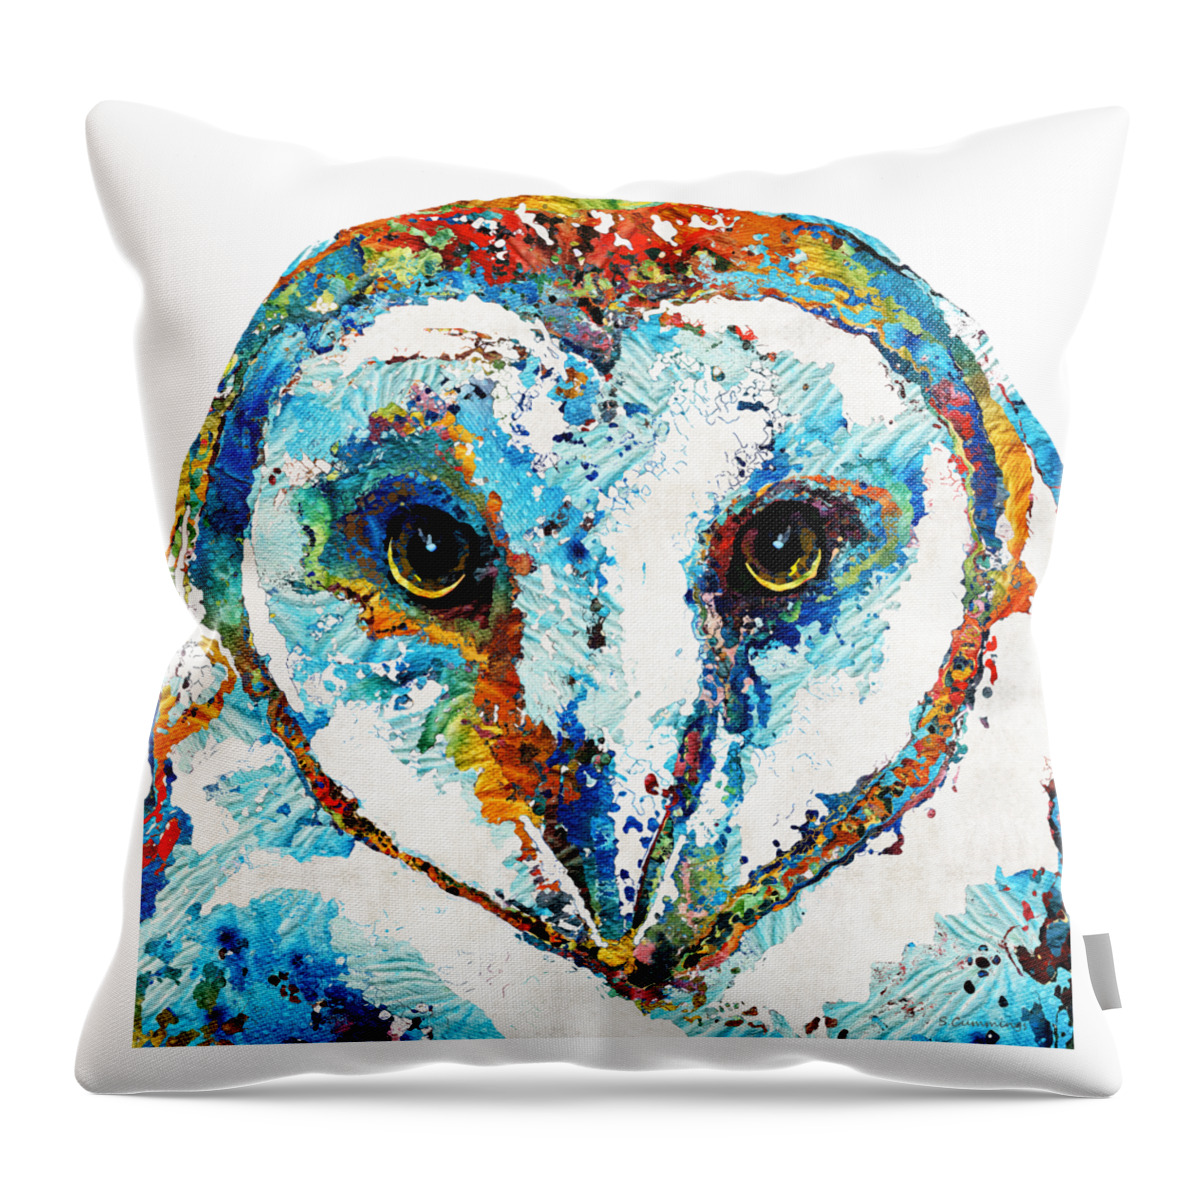 Owl Throw Pillow featuring the painting Colorful Barn Owl Art - Sharon Cummings by Sharon Cummings